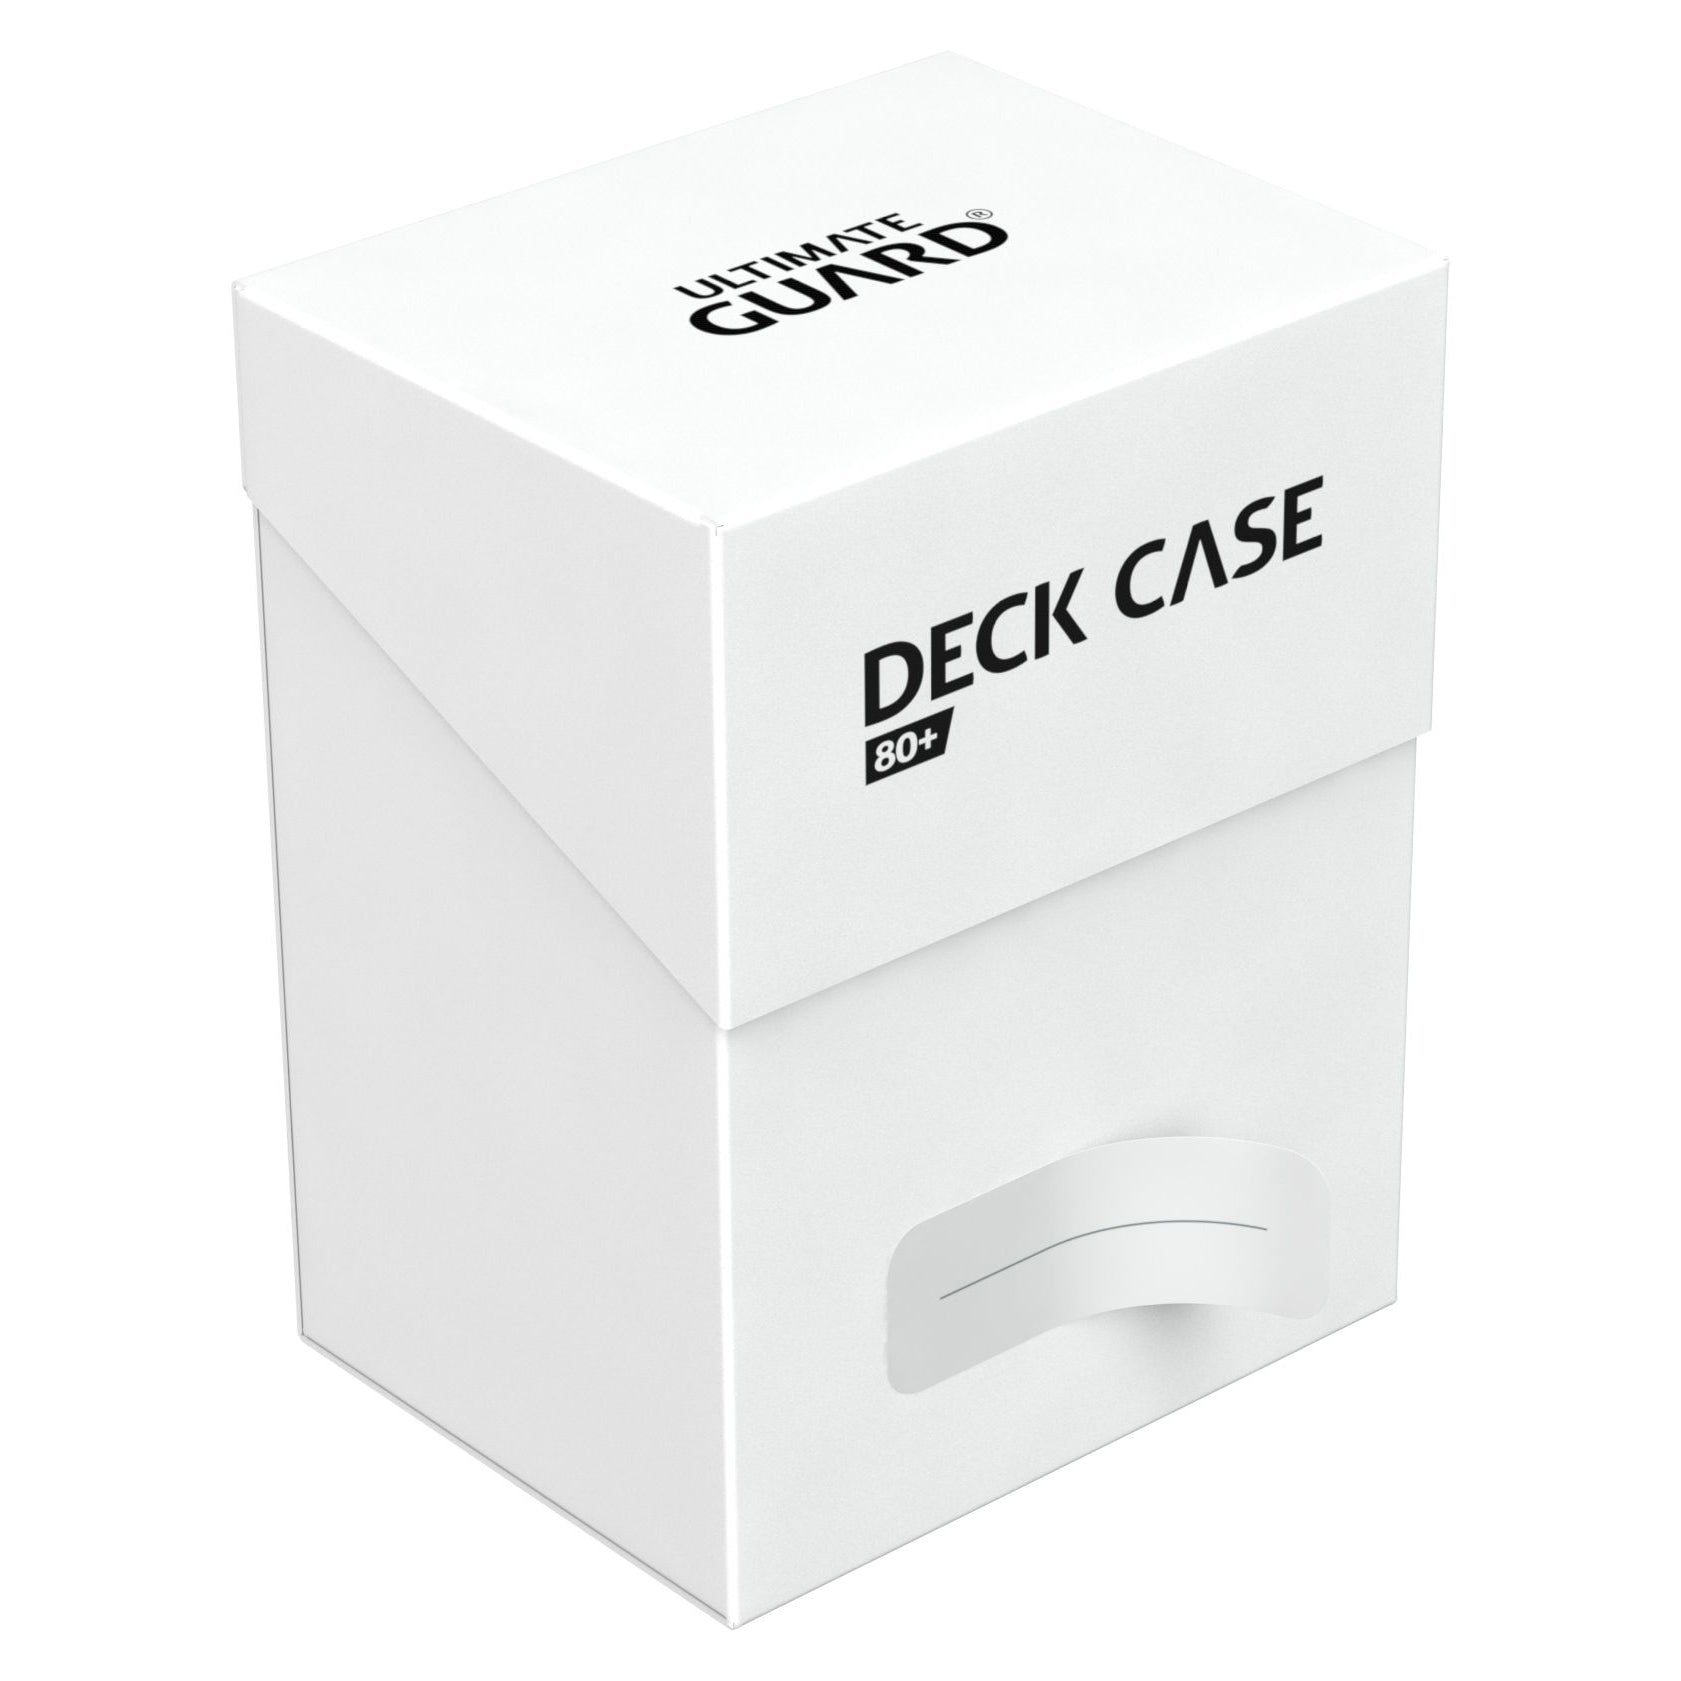 Ultimate Guard 80+ Deck Case holds 80 double-sleeved or 100 single-sleeved standard sized cards